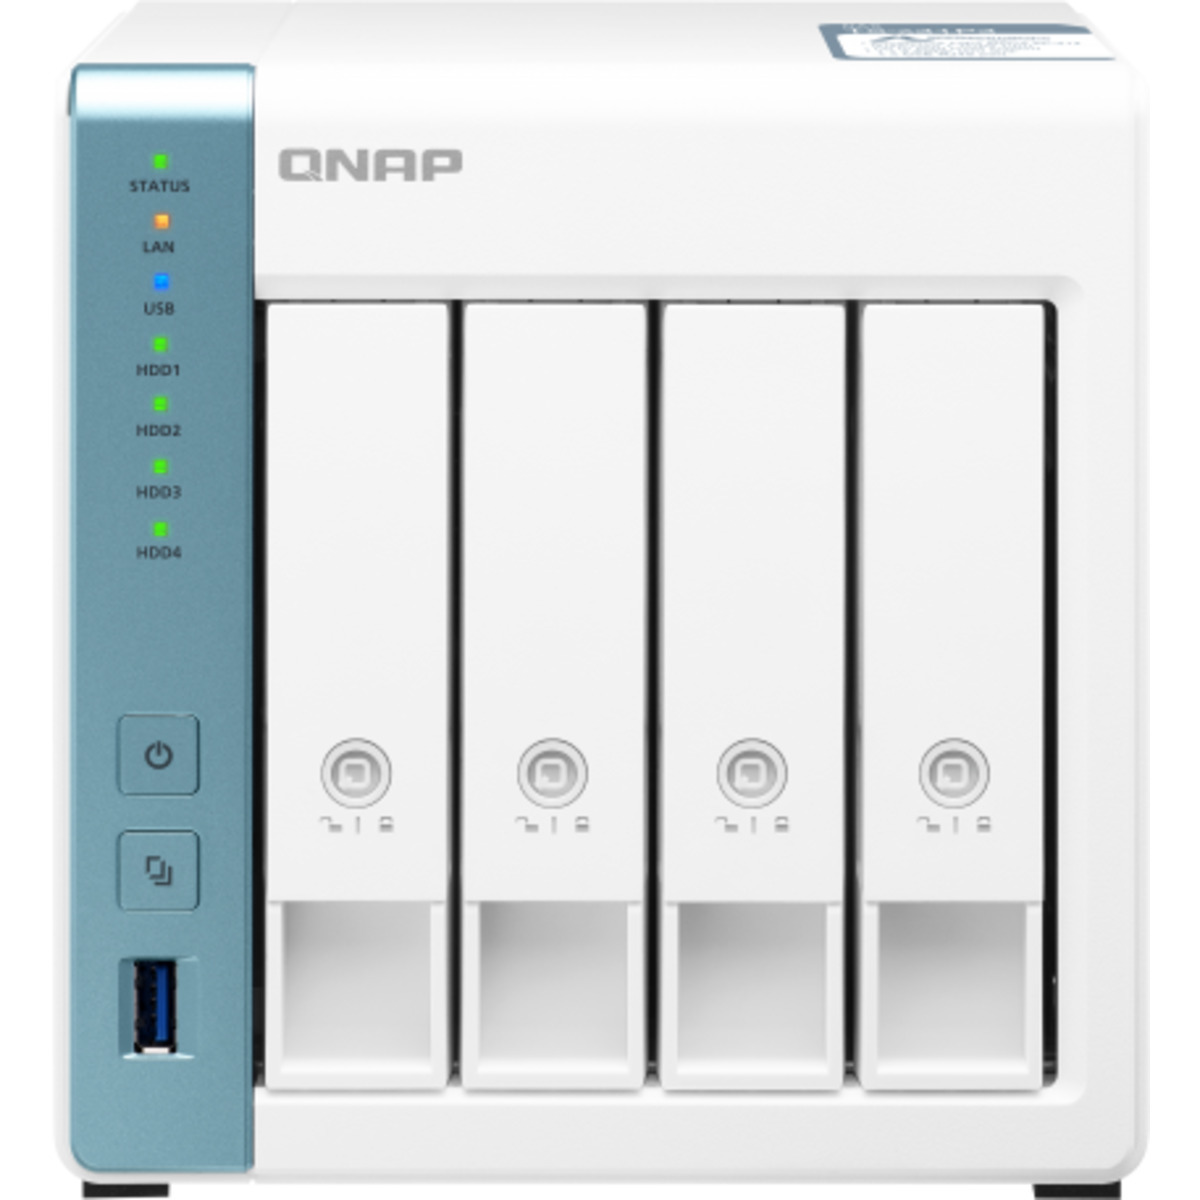 buy $1556 QNAP TS-431P3 32tb Desktop NAS - Network Attached Storage Device 4x8000gb Western Digital Ultrastar DC HC320 HUS728T8TALE6L4 3.5 7200rpm SATA 6Gb/s HDD ENTERPRISE Class Drives Installed - Burn-In Tested - FREE RAM UPGRADE - nas headquarters buy network attached storage server device das new raid-5 free shipping usa christmas new year holiday sale TS-431P3